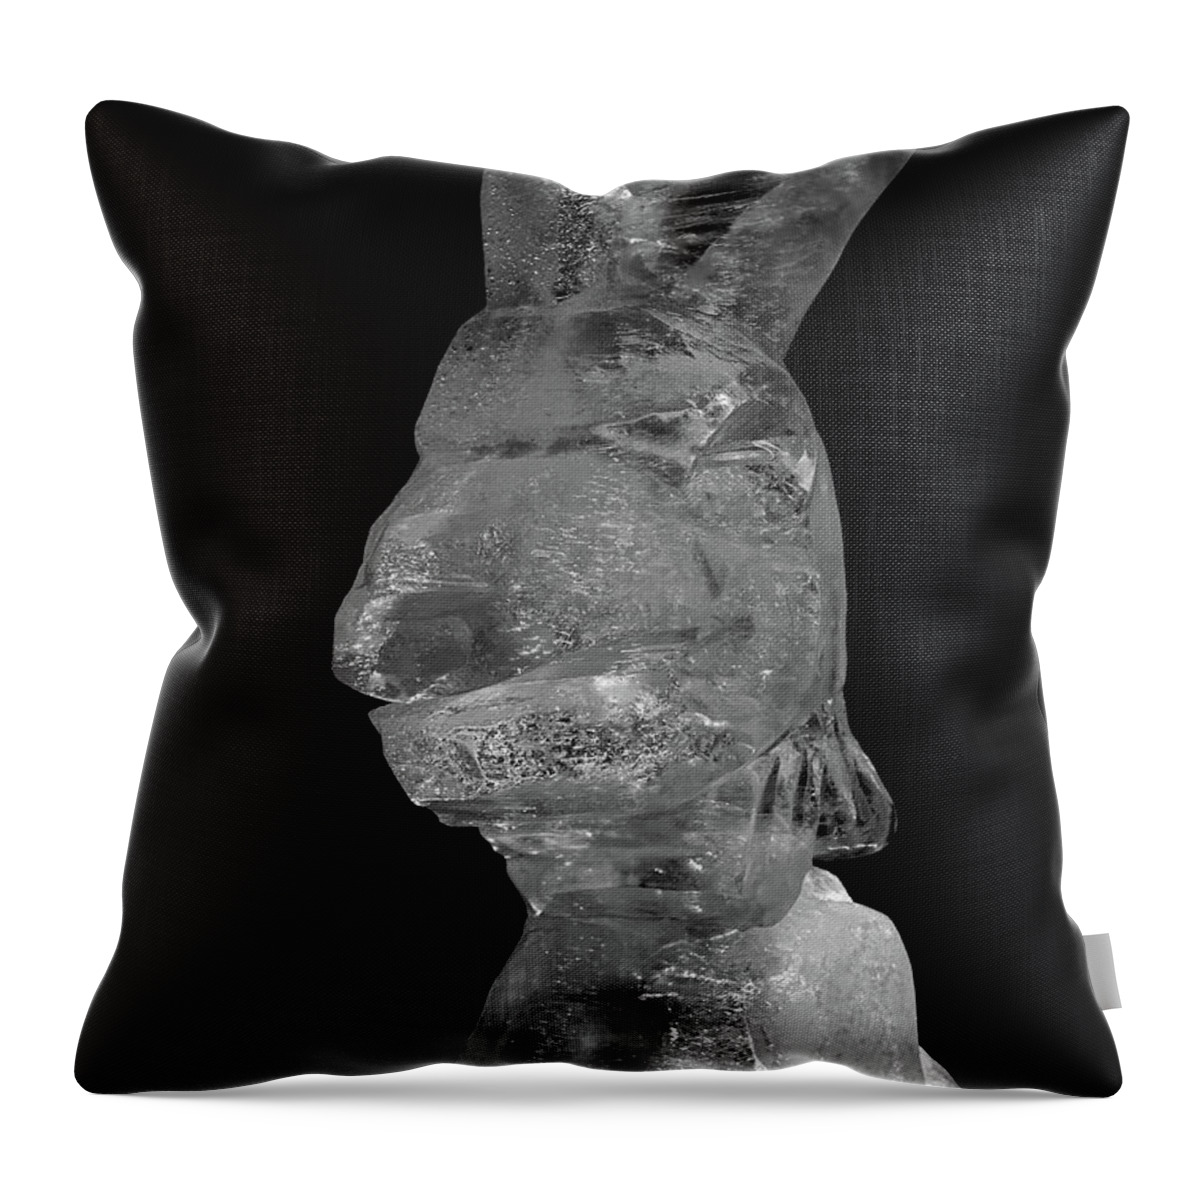 Finland Throw Pillow featuring the photograph Cool Rabbit by Jouko Lehto